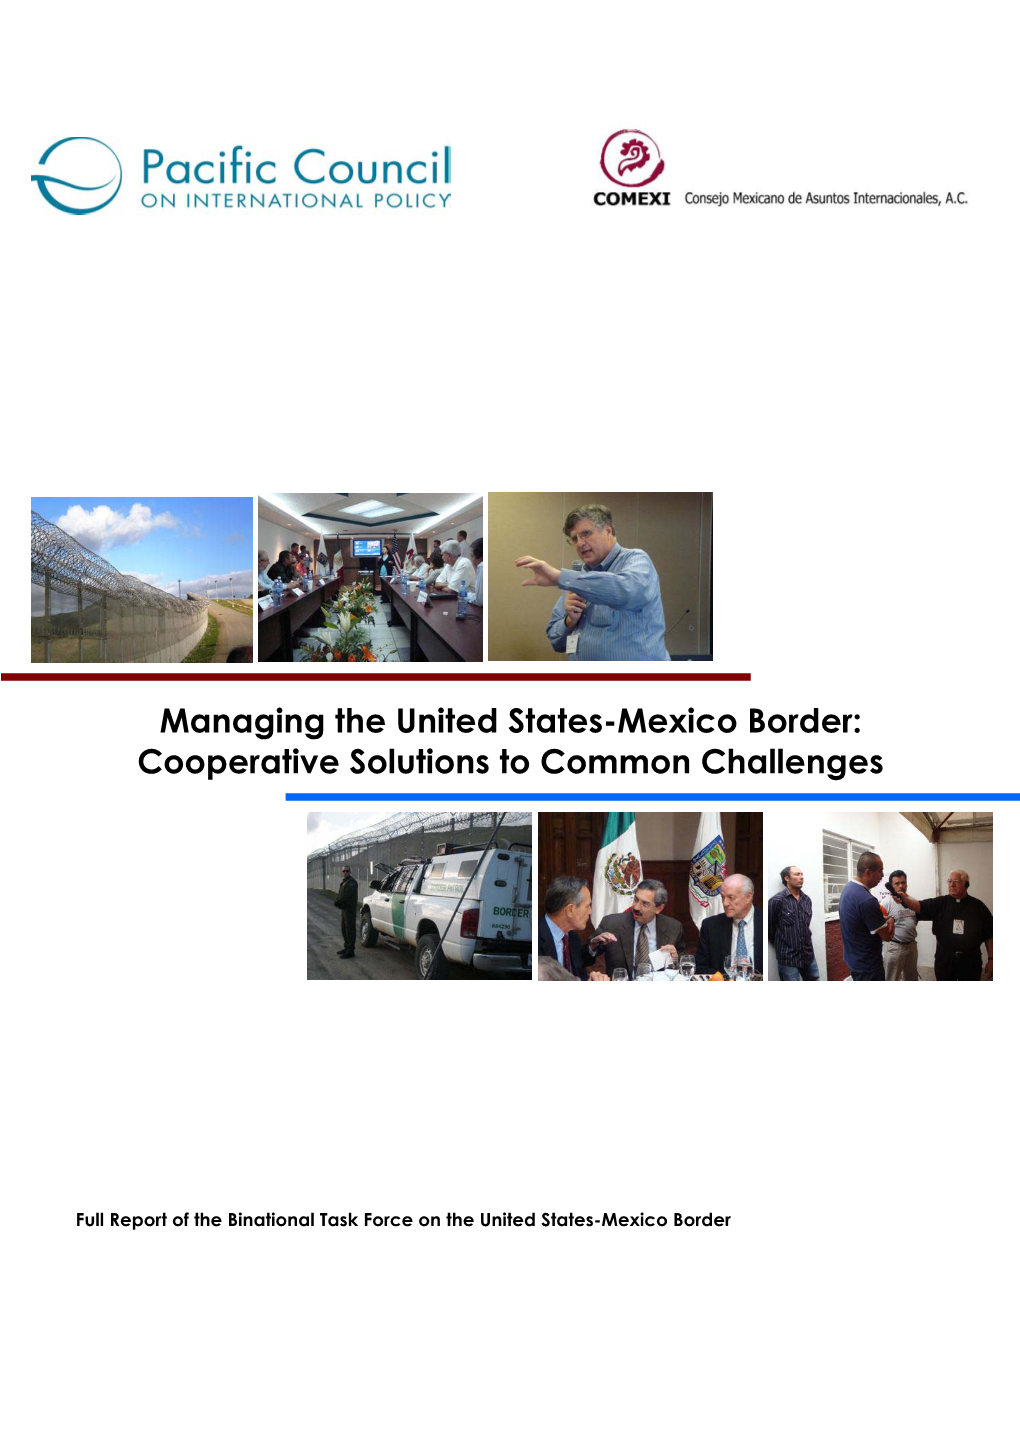 Managing the United States-Mexico Border: Cooperative Solutions to Common Challenges